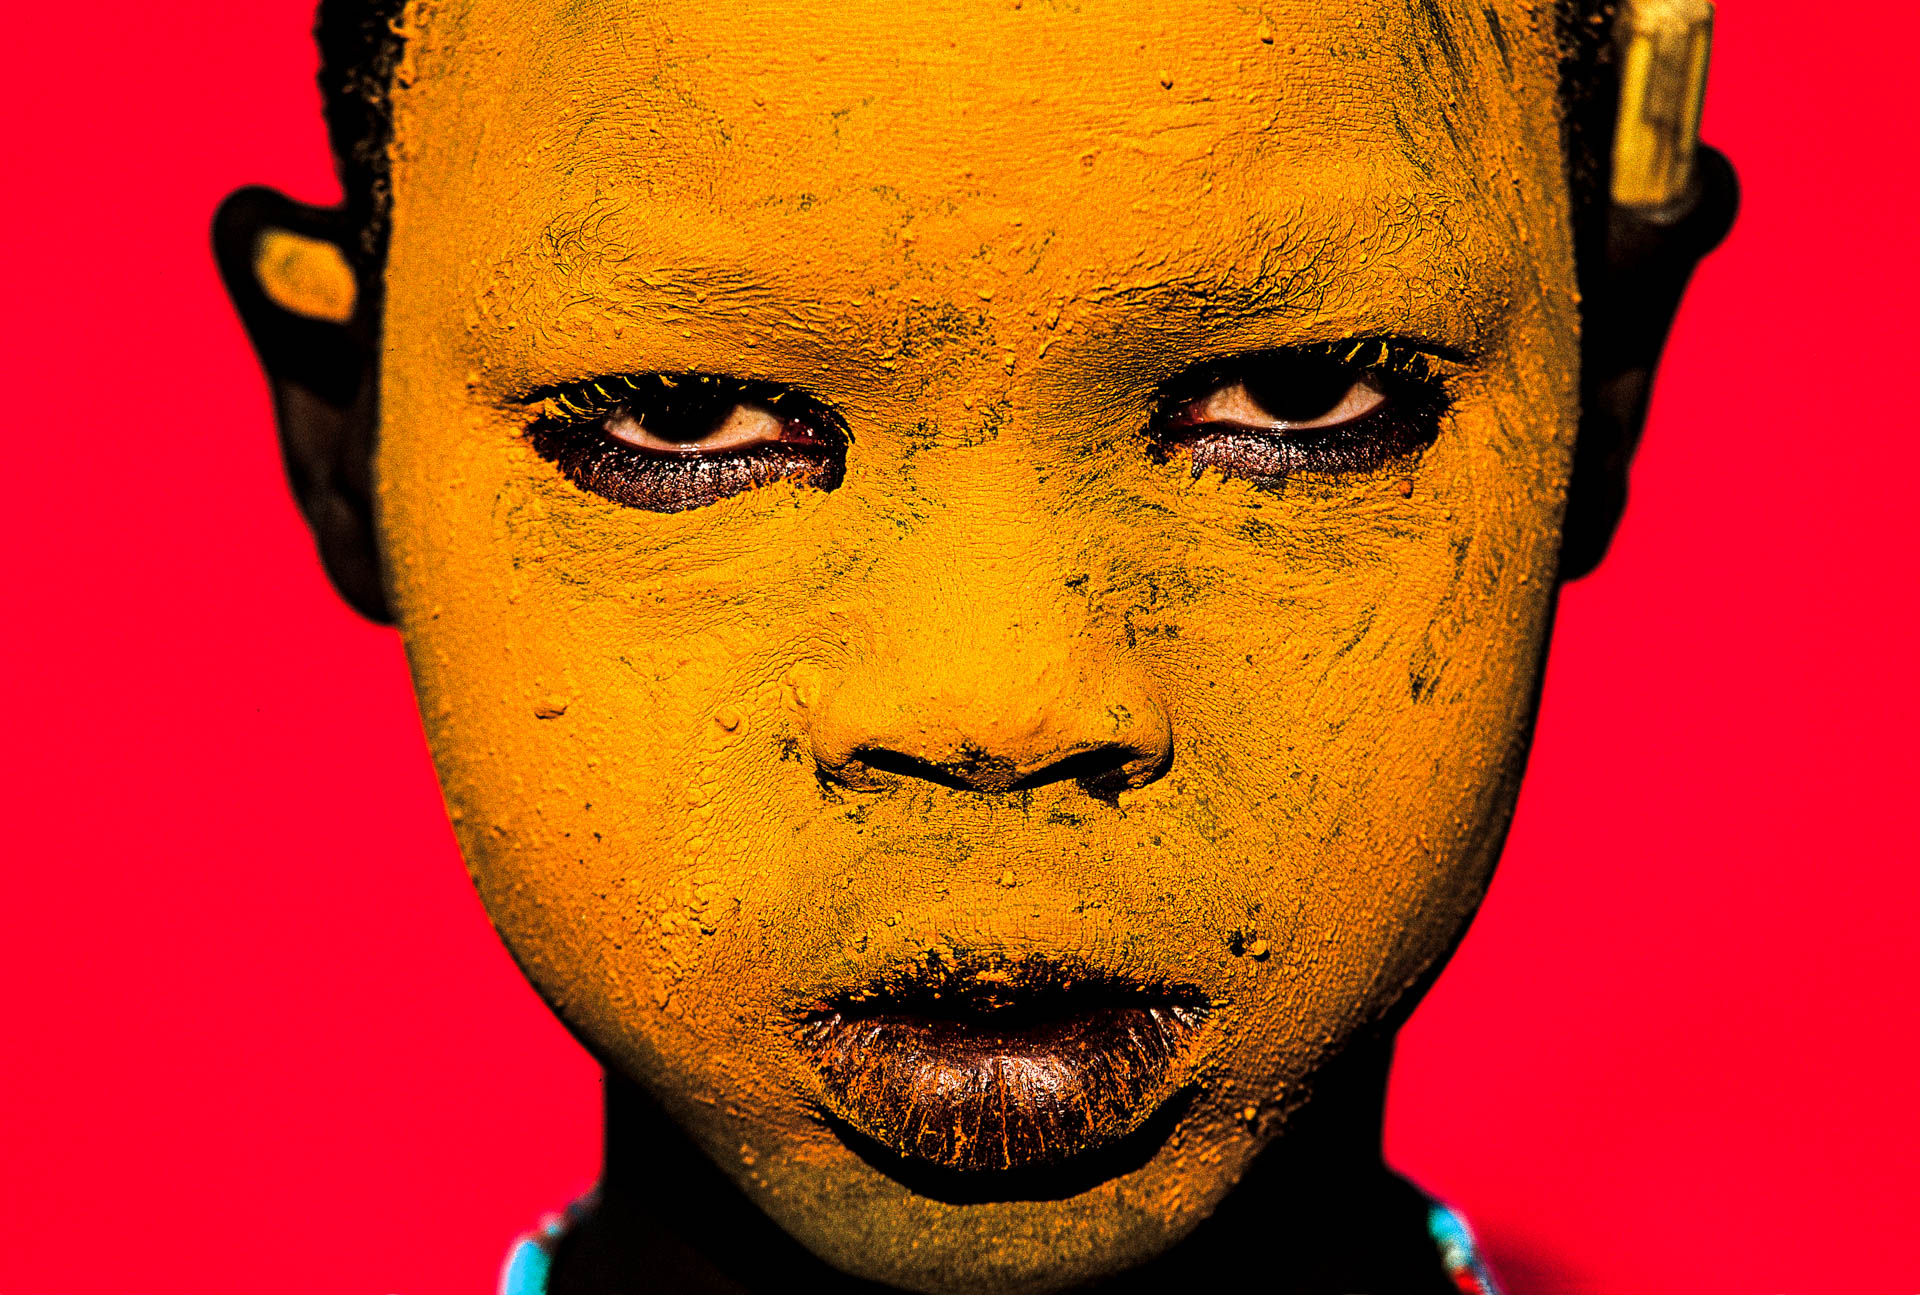  A Surma child, whose face is painted yellow, poses for the photographer. 